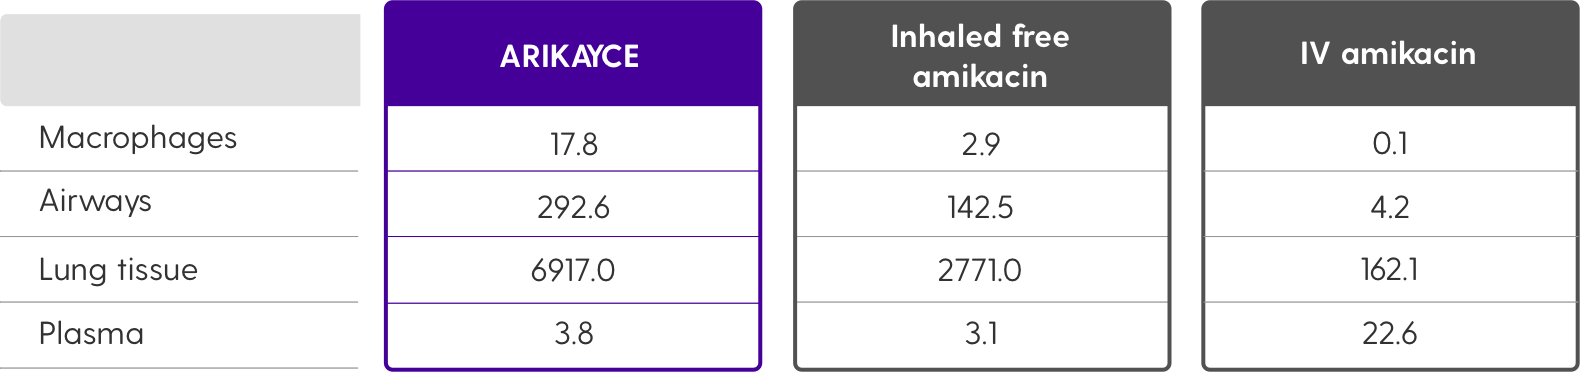 Macrophages in ARIKAYCE is 17.8, for Inhaled free amikacin is 2.9, and in IV amikacin is 0.1. Airways  in ARIKAYCE is 292.6, for Inhaled free amikacin is 142.5, and in IV amikacin is 4.2. Lung tissue in ARIKAYCE is 6917.0, for Inhaled free amikacin is 2771.0, and in IV amikacin is 162.1. And plasma in ARIKAYCE is 3.8, for Inhaled free amikacin is 3.1, and in IV amikacin is 22.6.